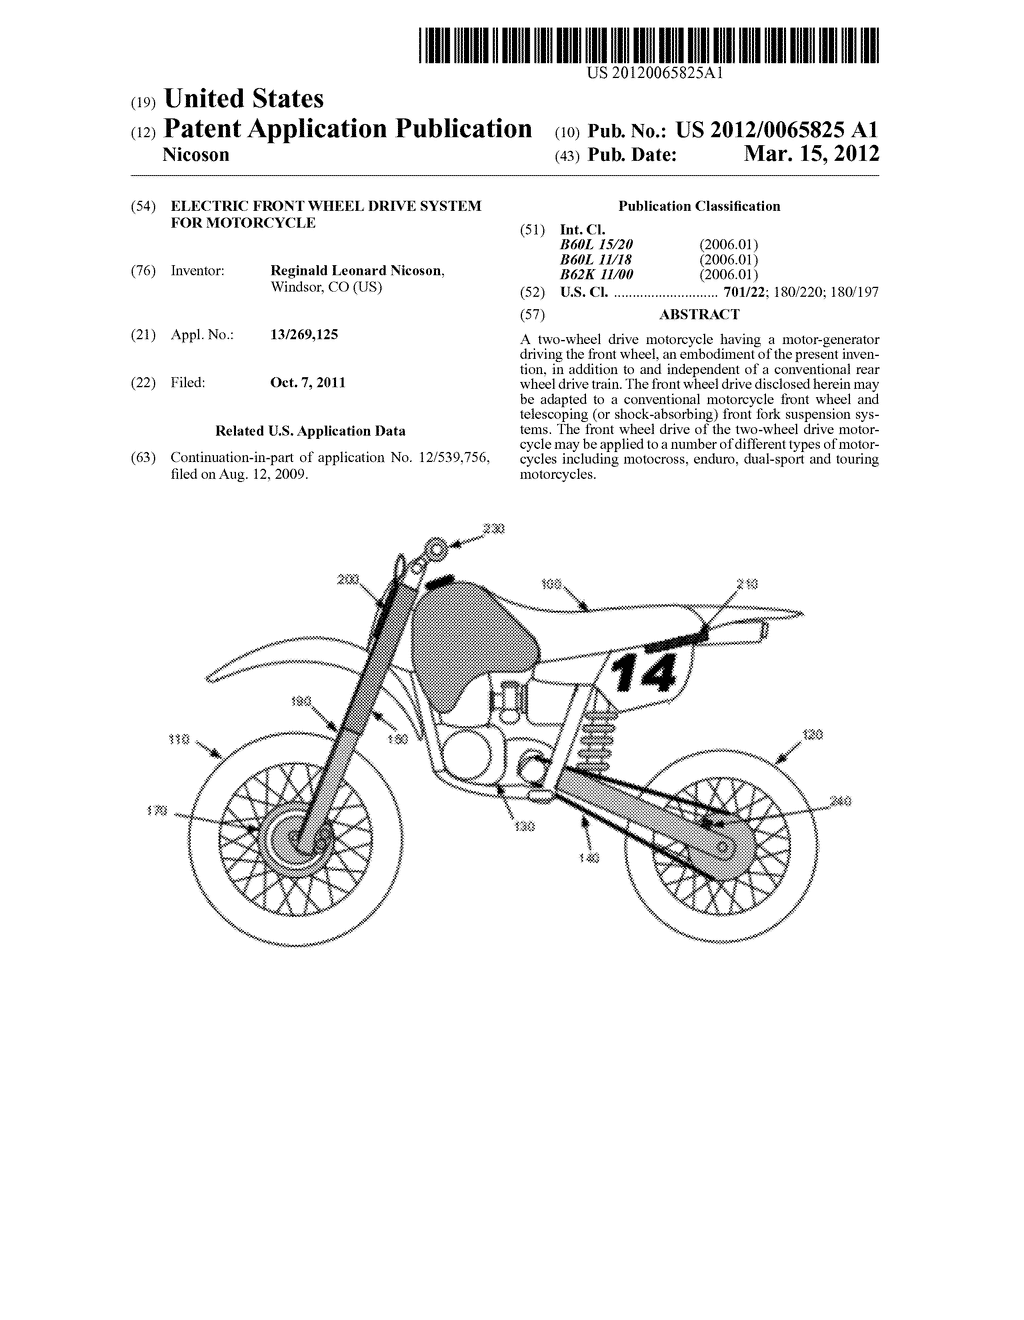 Electric Front Wheel Drive System for Motorcycle - diagram, schematic, and image 01